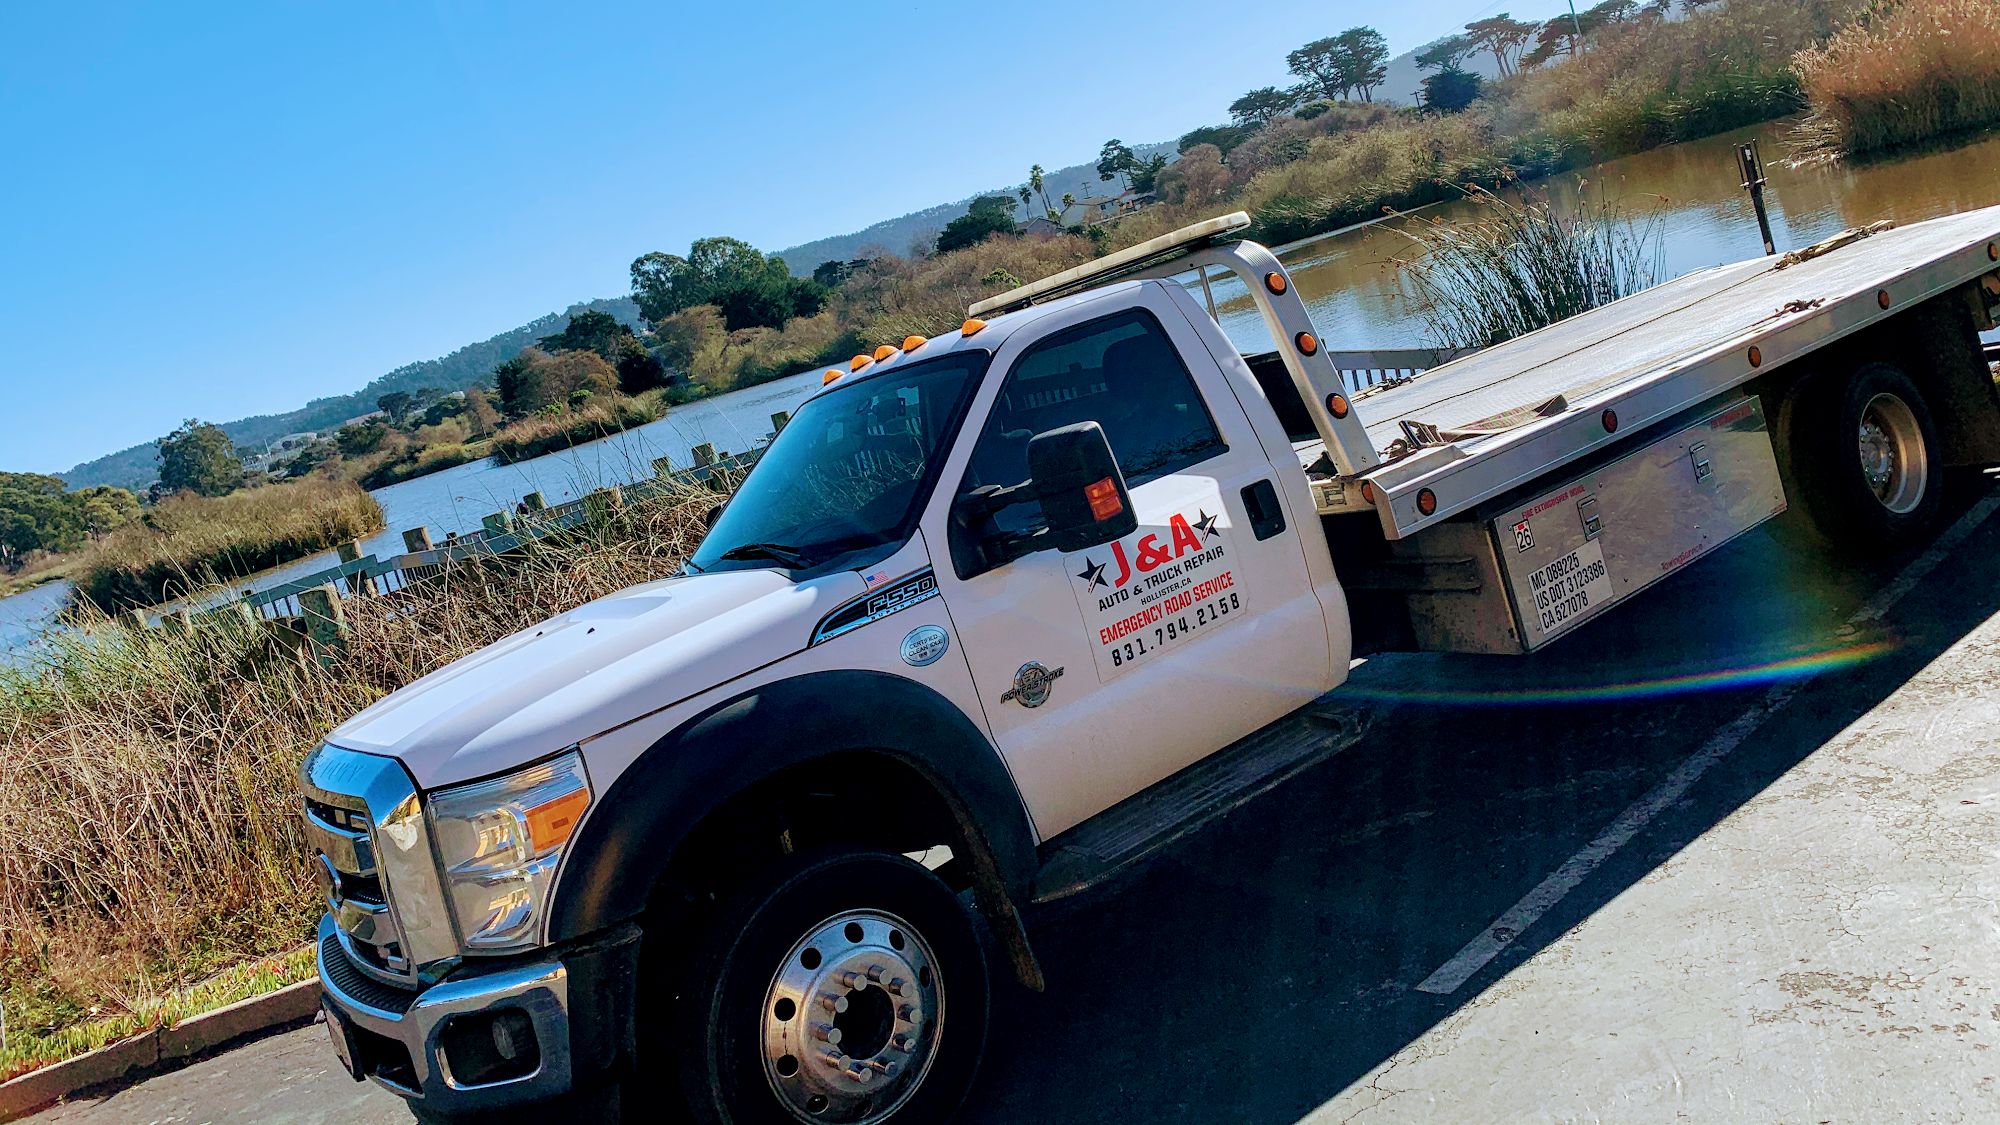 J & A Auto & Truck Repair. *Emergency Road Services 24Hrs*Towing